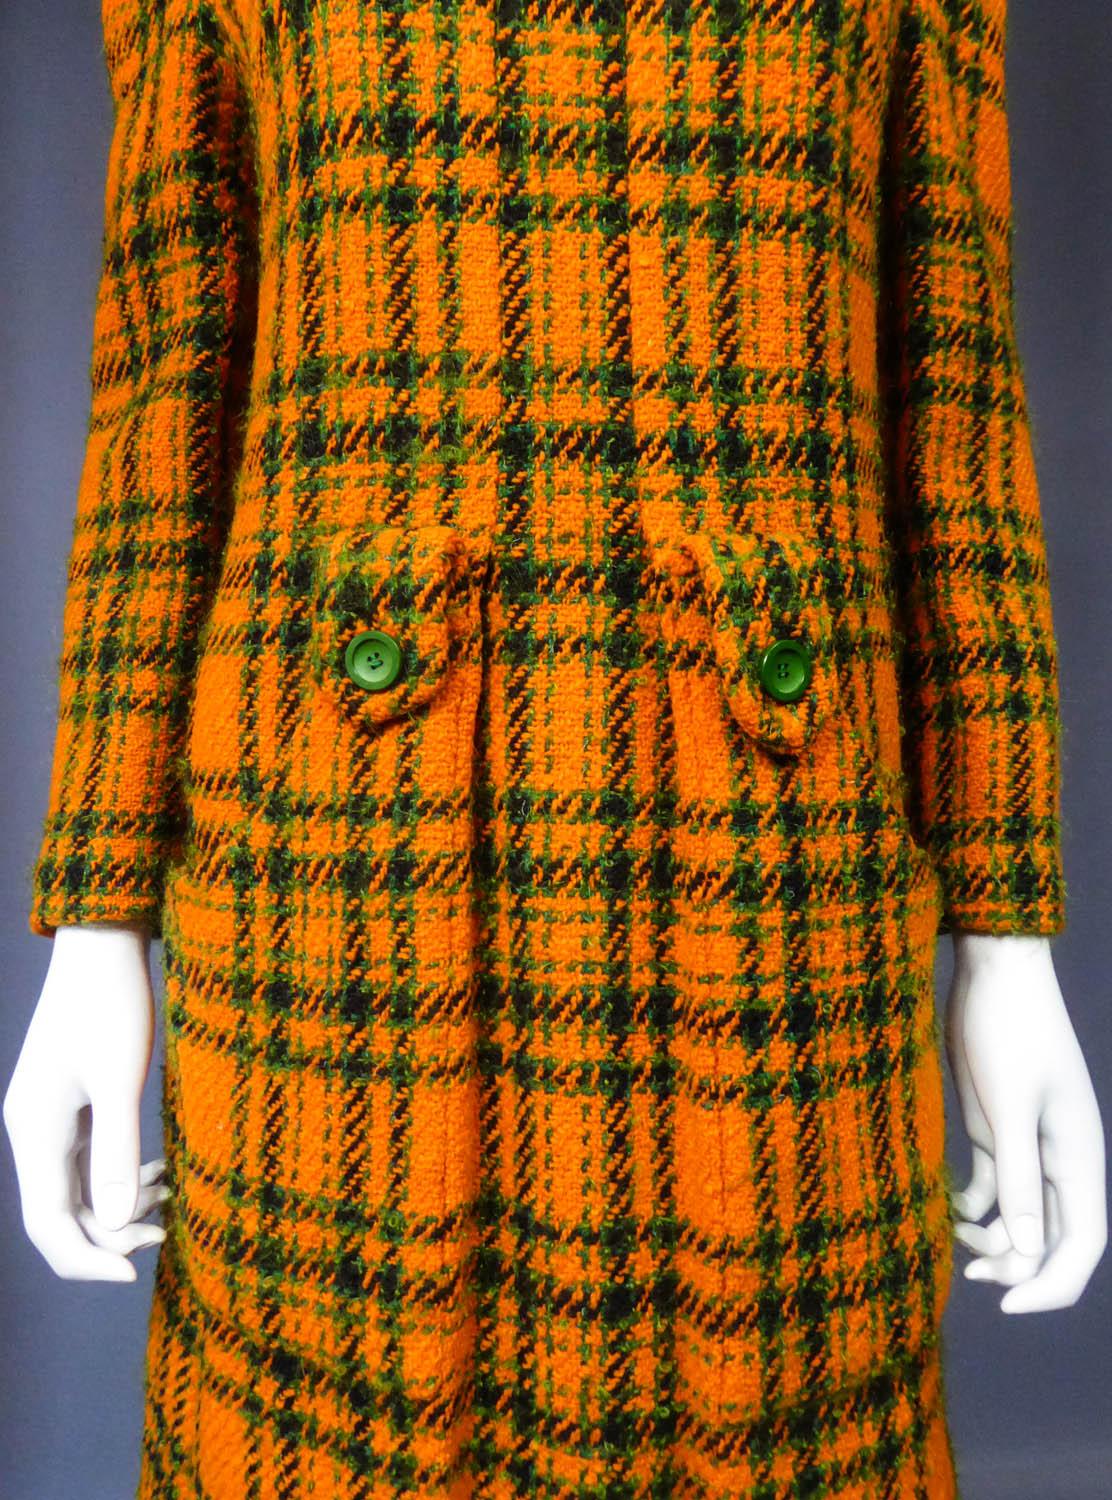 Circa 1968/1970
France

Mini dress Demi Couture Jeanne Lanvin in Scottish tartan dating from the Yé-yé period of the late 1960s. Thick orange wool knit with green and black check. Straight cut slightly flared with small turtleneck and long sleeves.